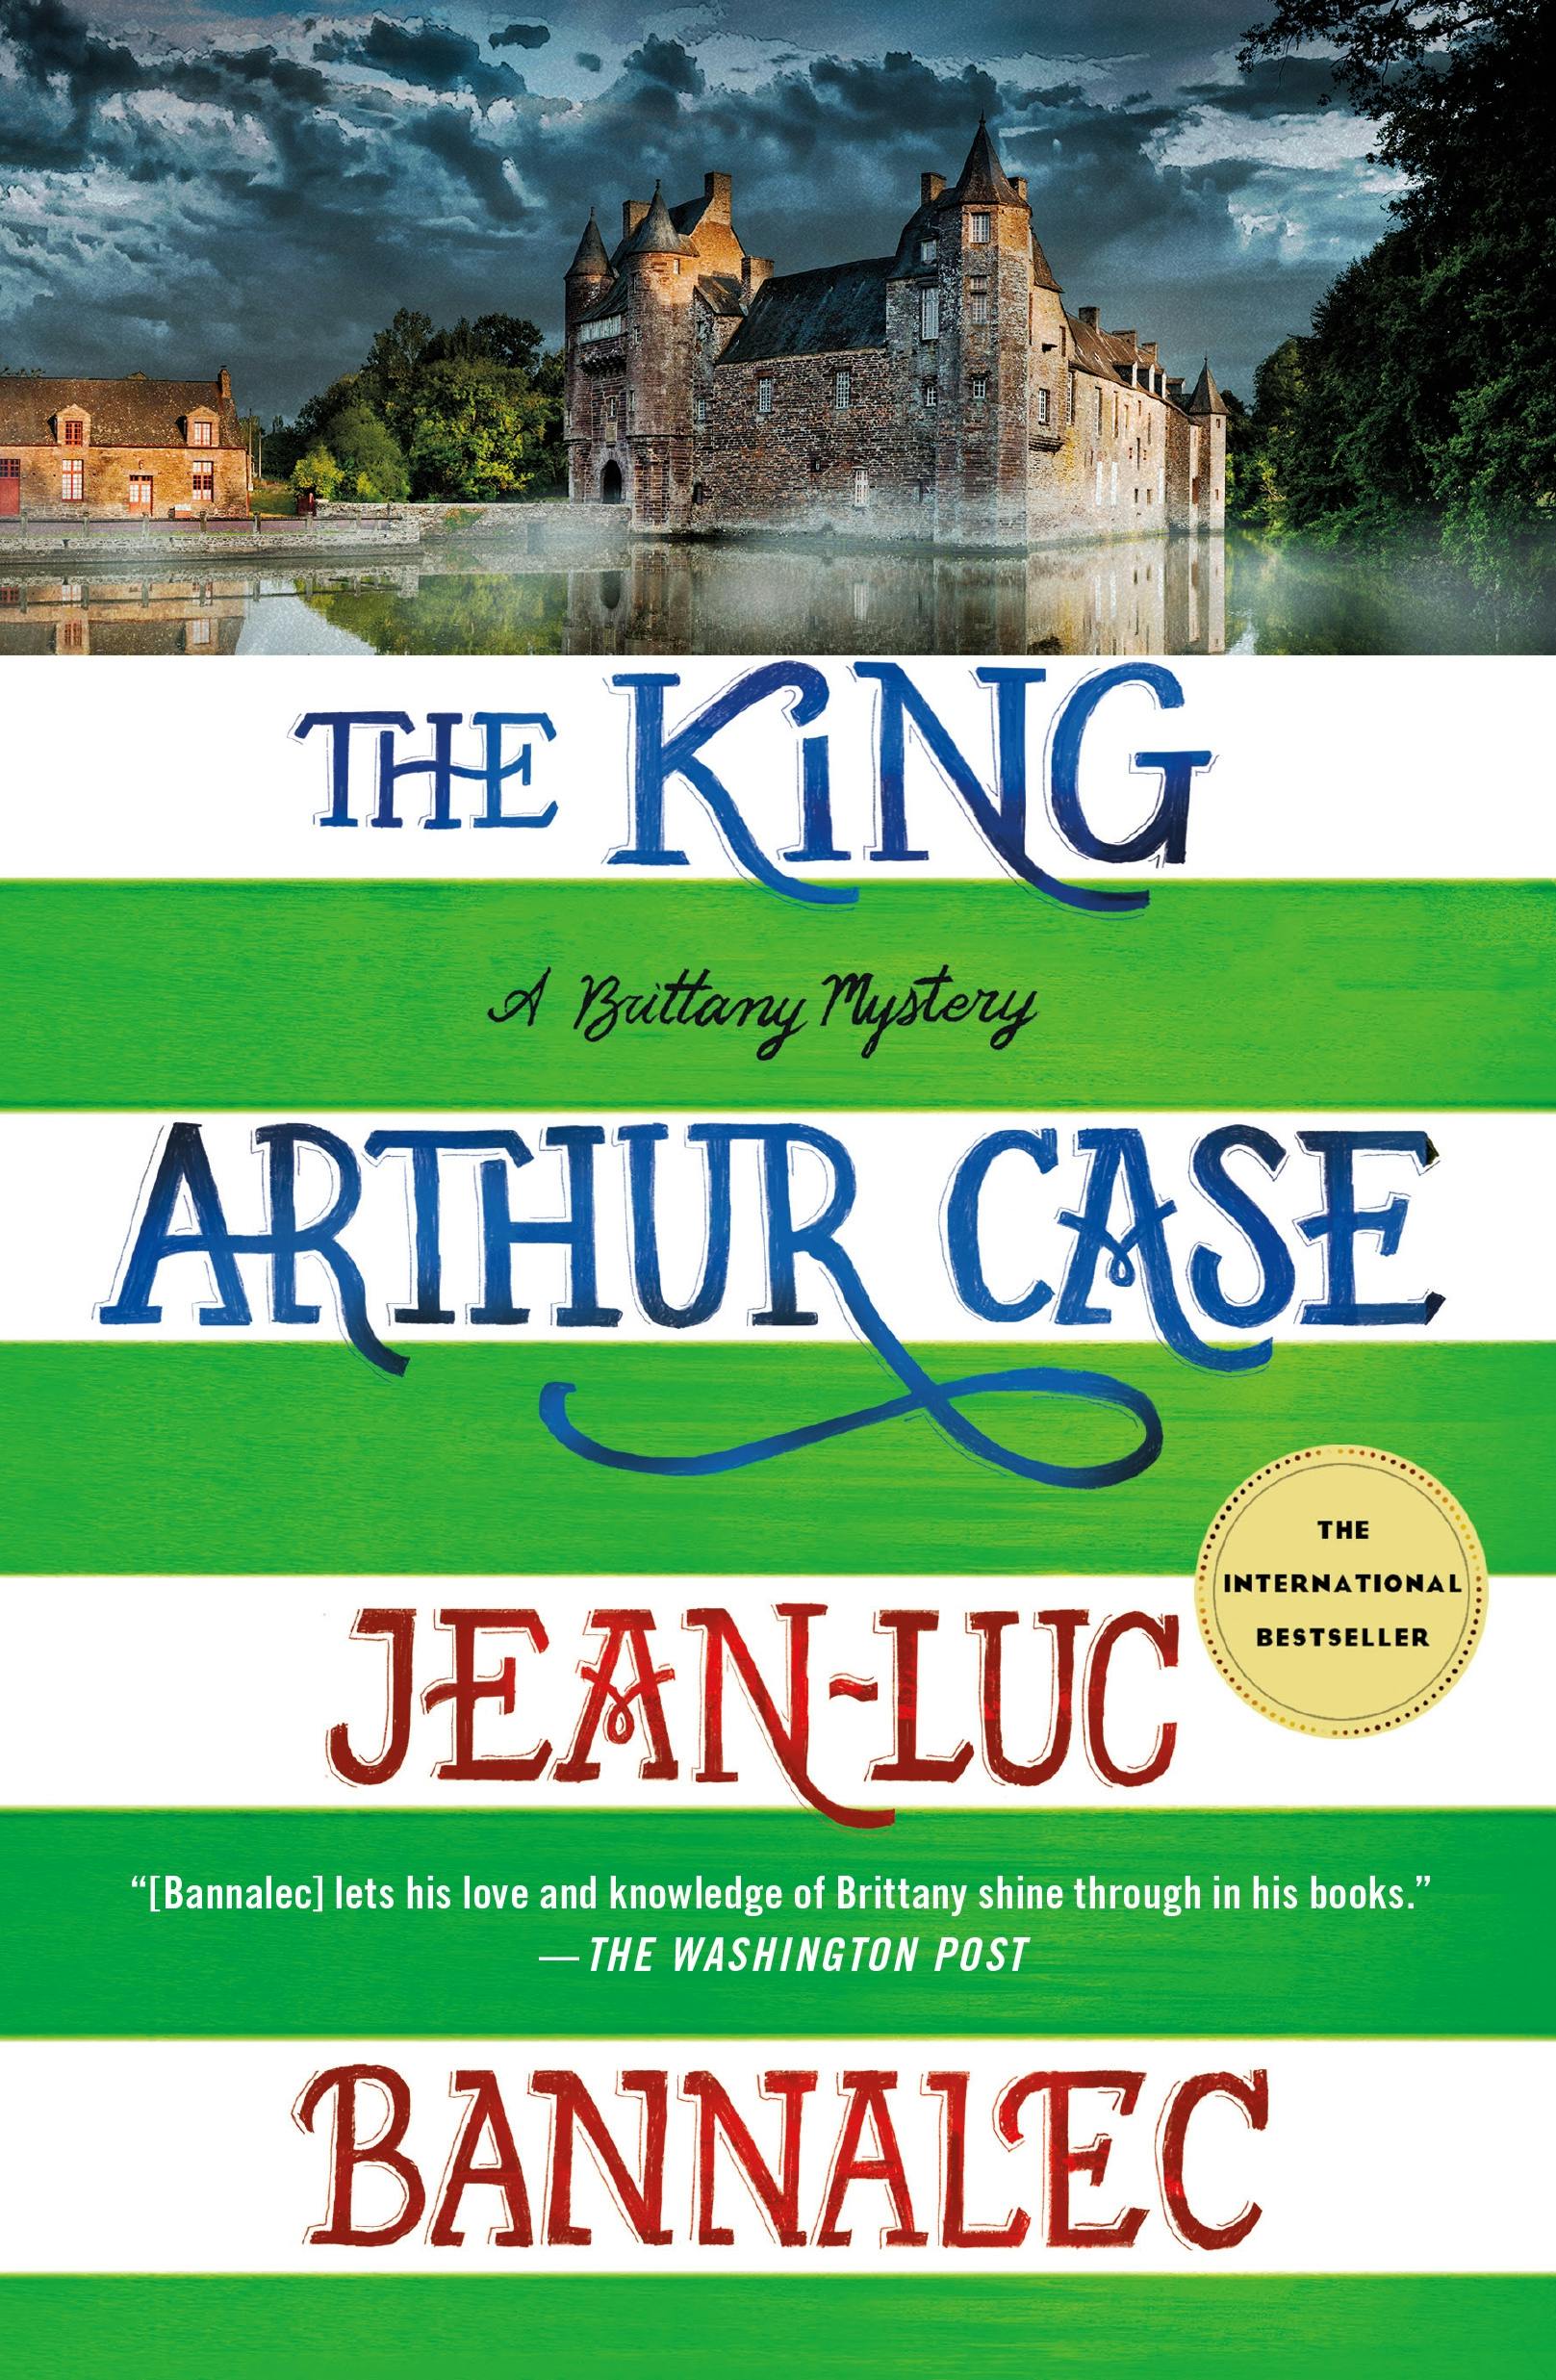 Image of The King Arthur Case